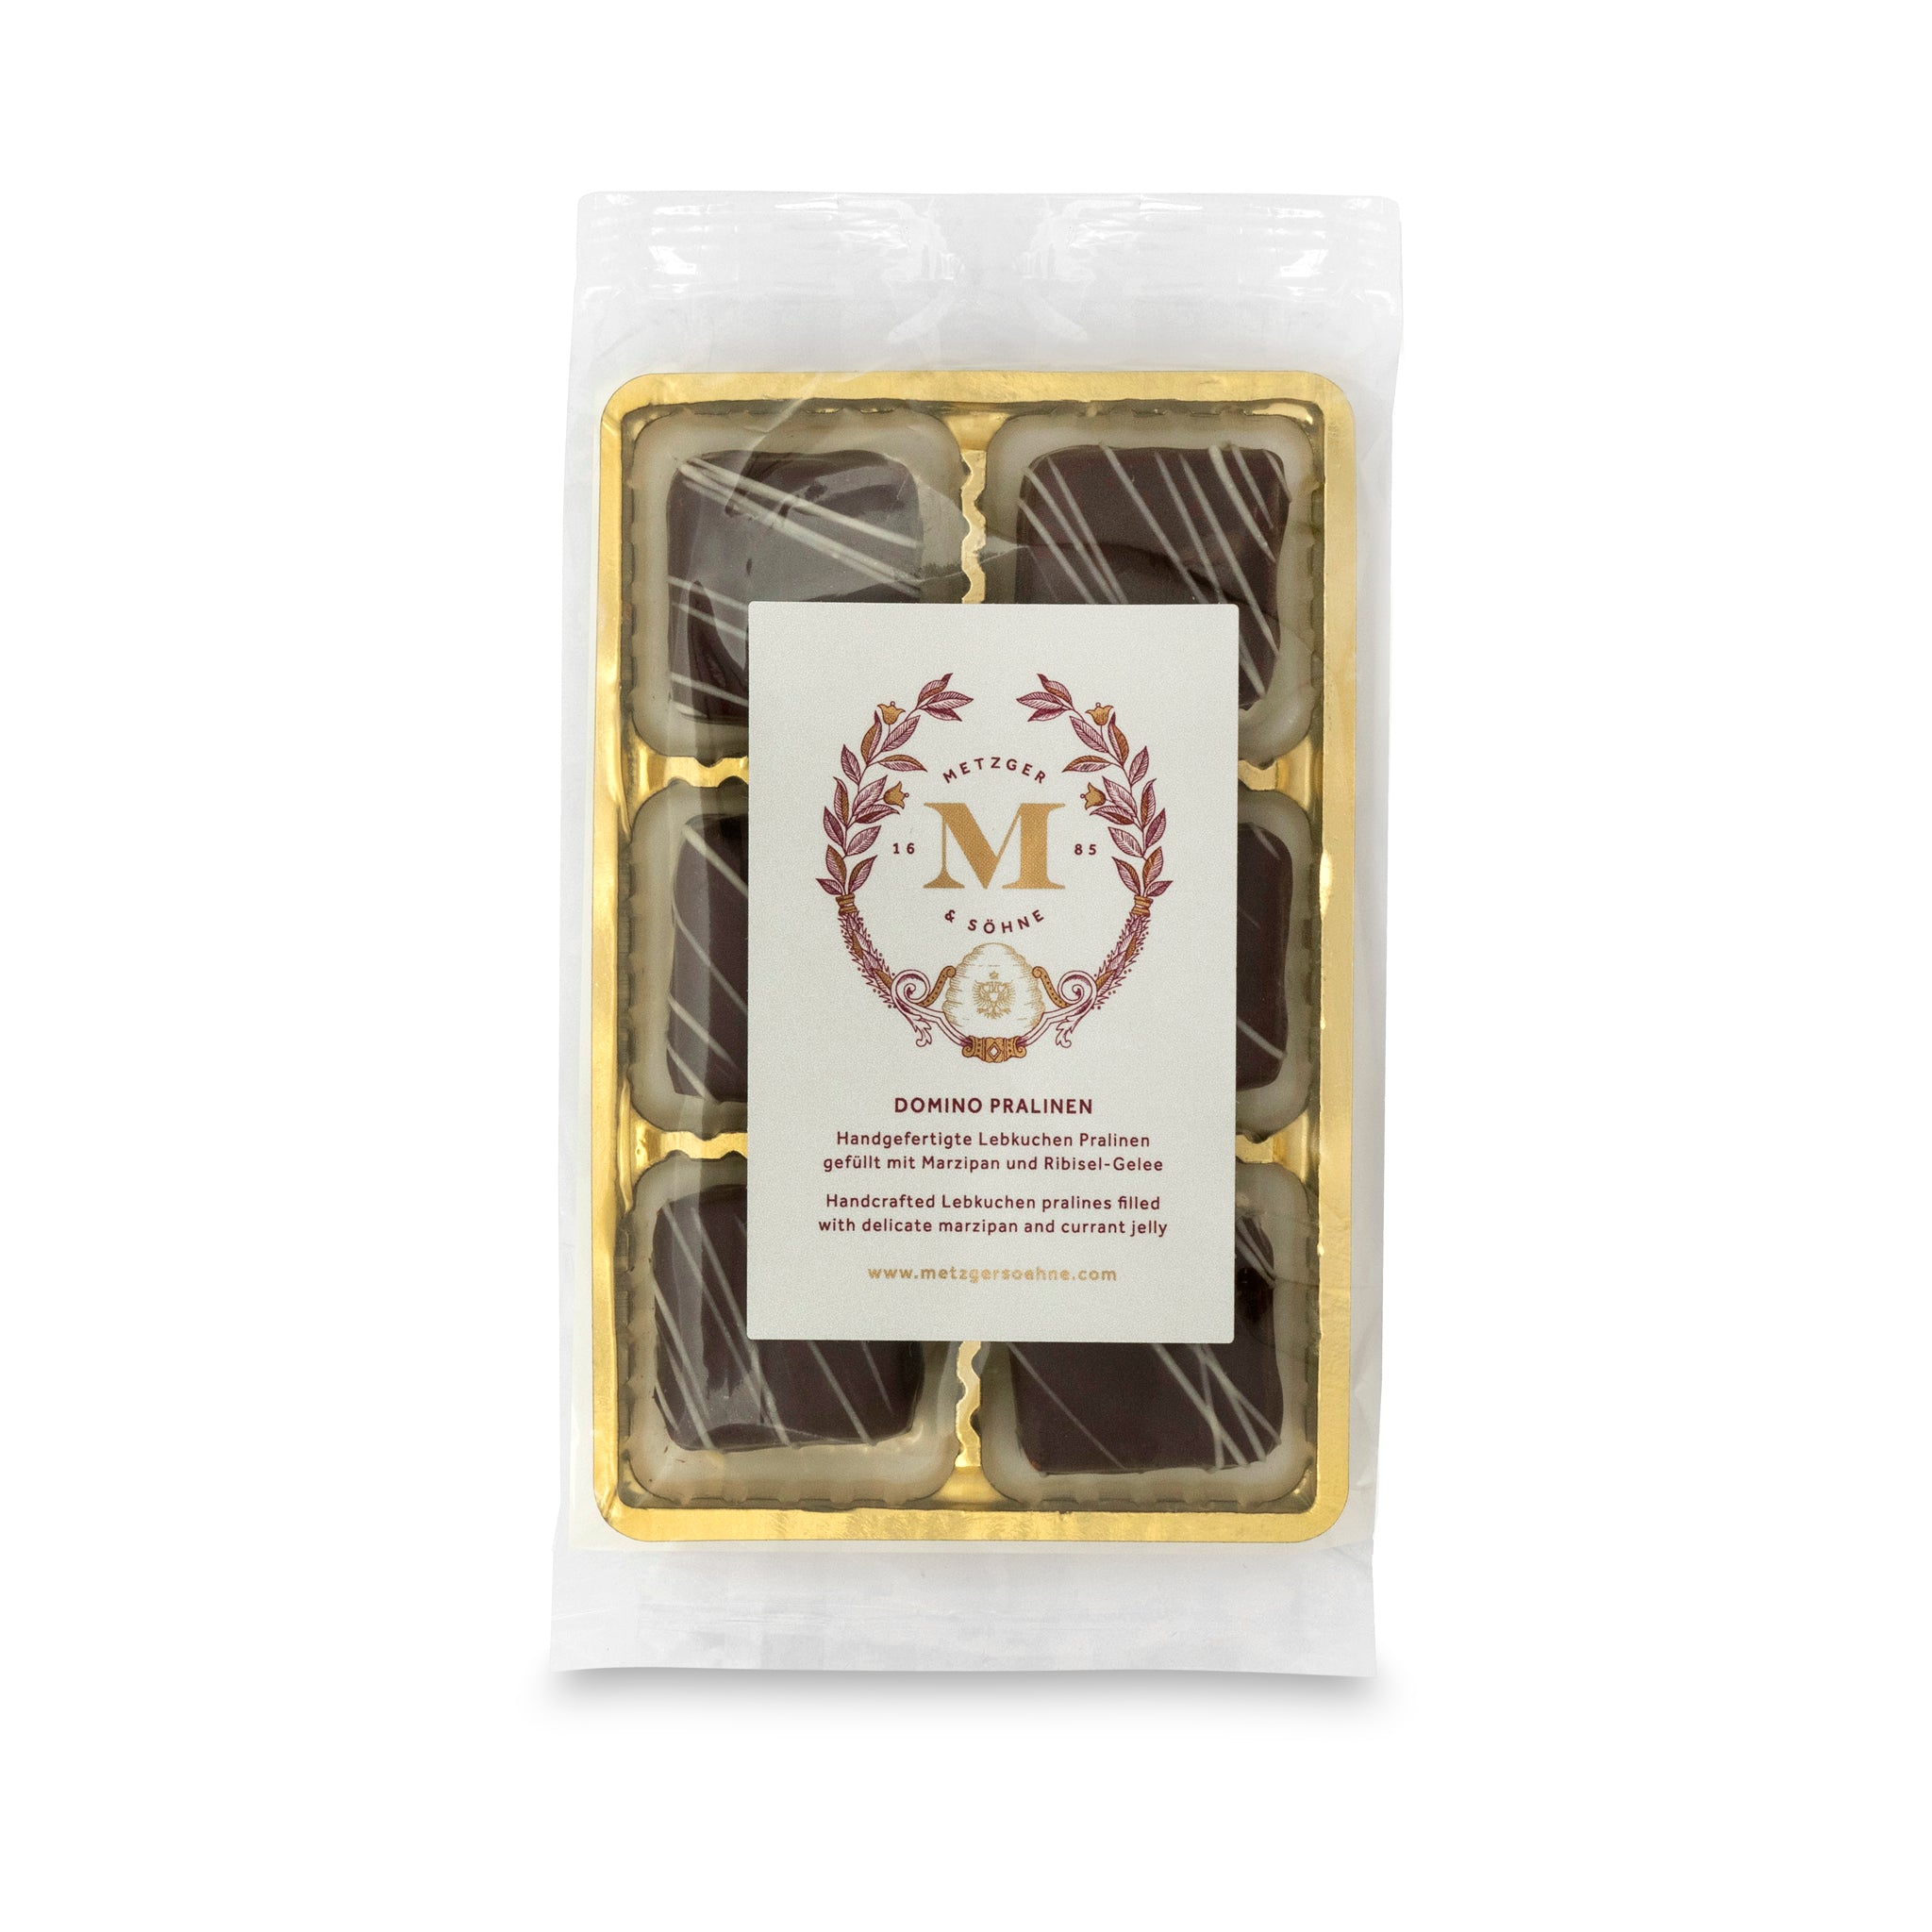 6 handcrafted Lebkuchen 'honey cake' pralines filled with opulent currant jelly and marzipan, enrobed in dark chocolate and topped with white chocolate. The high quality chocolate couvertures enchant with an indulgent flavour, perfectly complimenting our Lebkuchen.